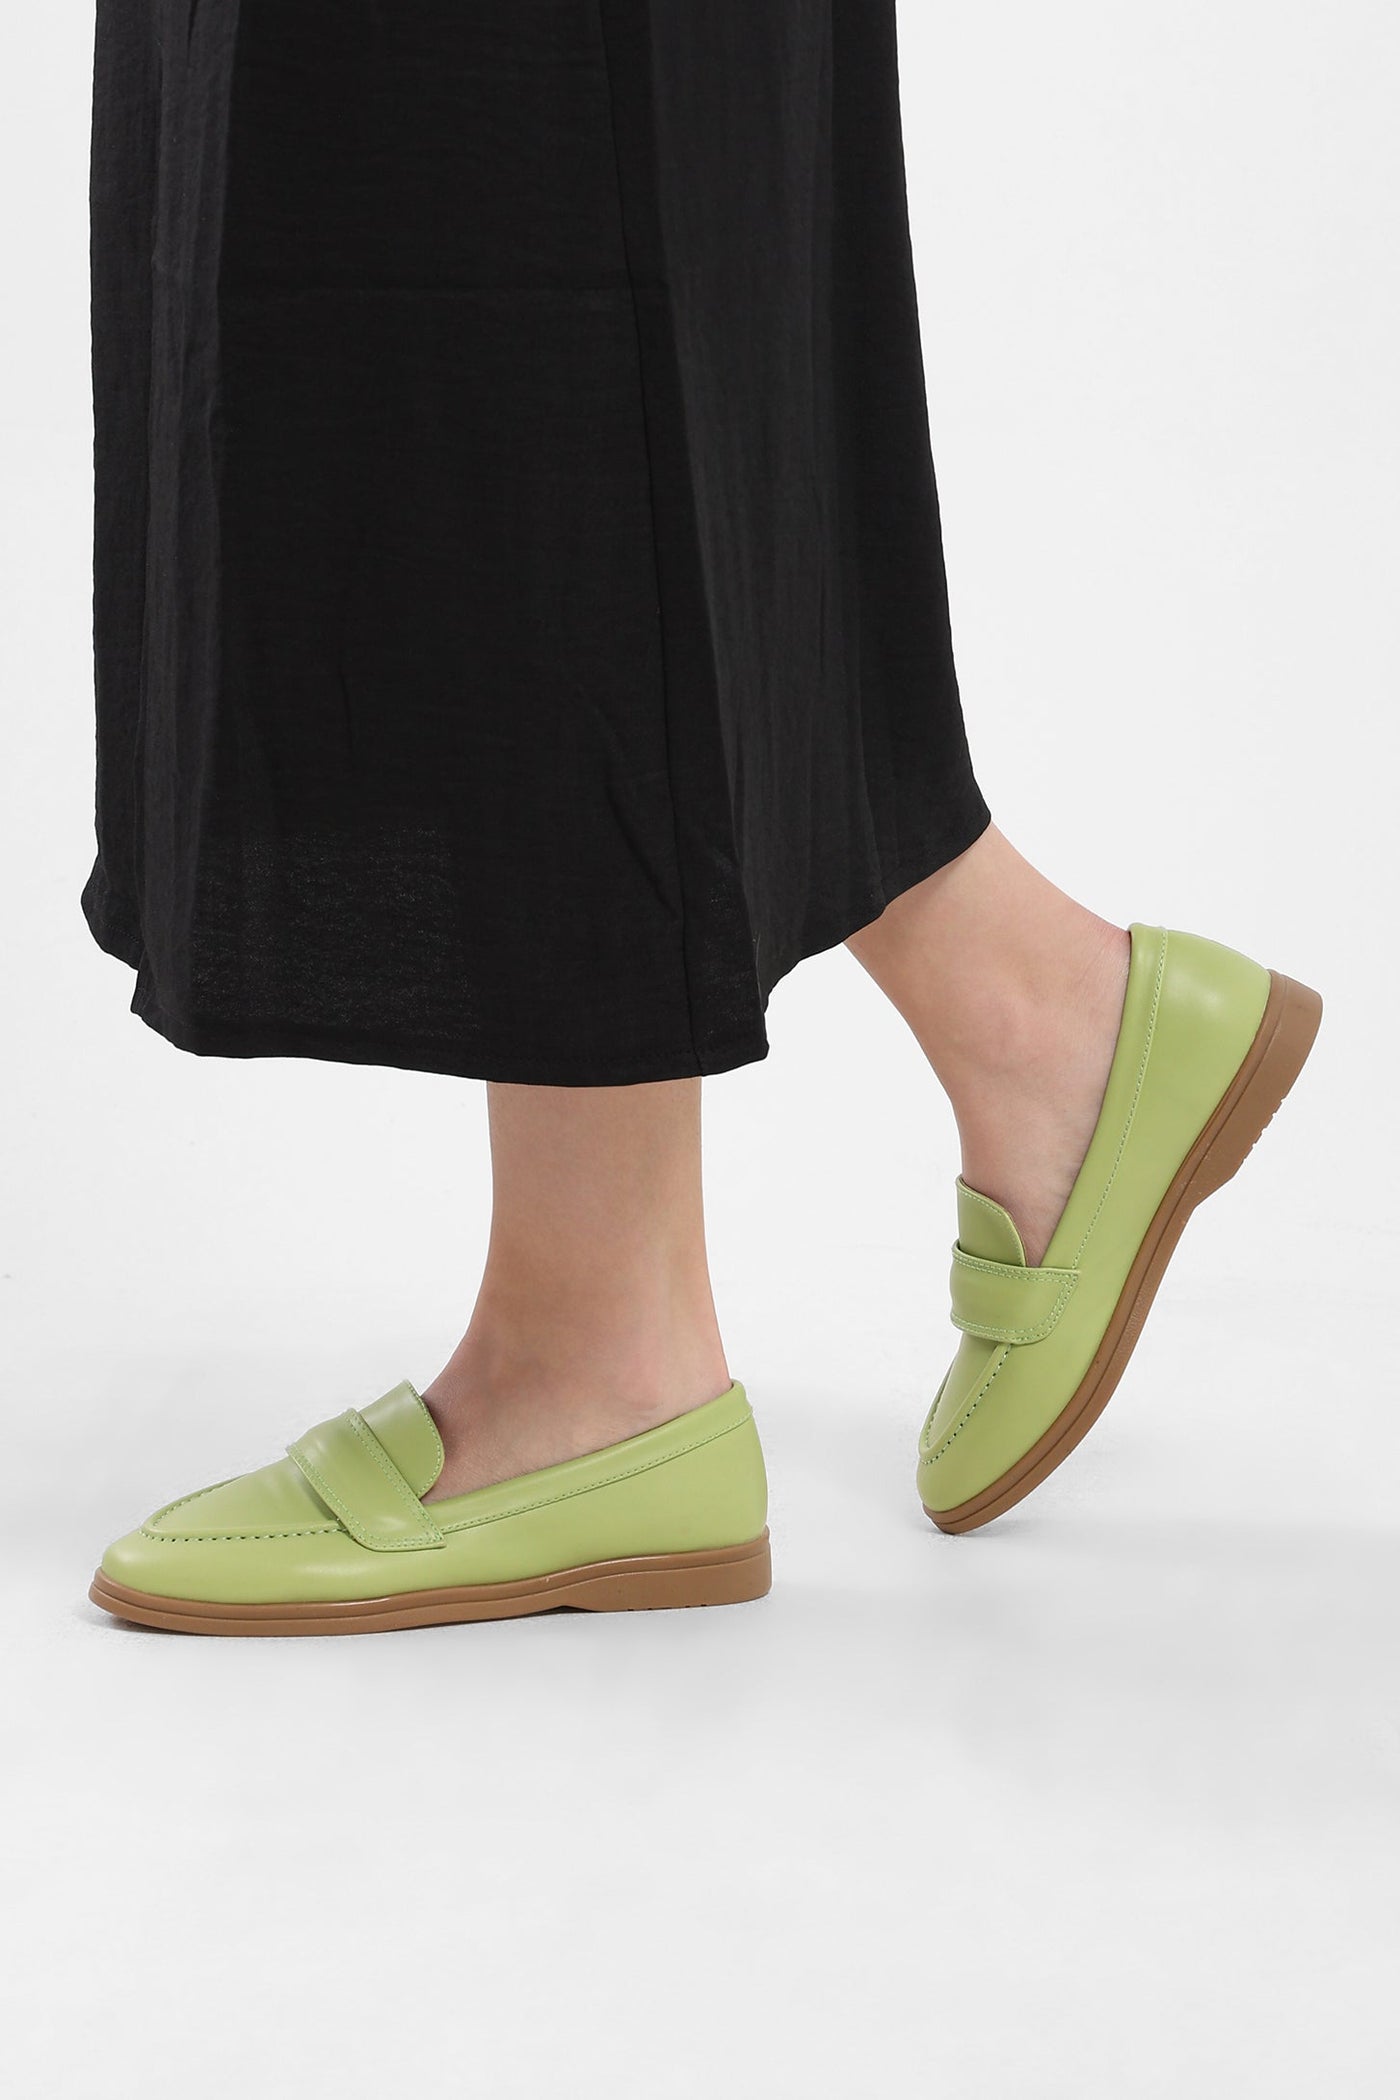 Everyday Ease Loafers - Lemon